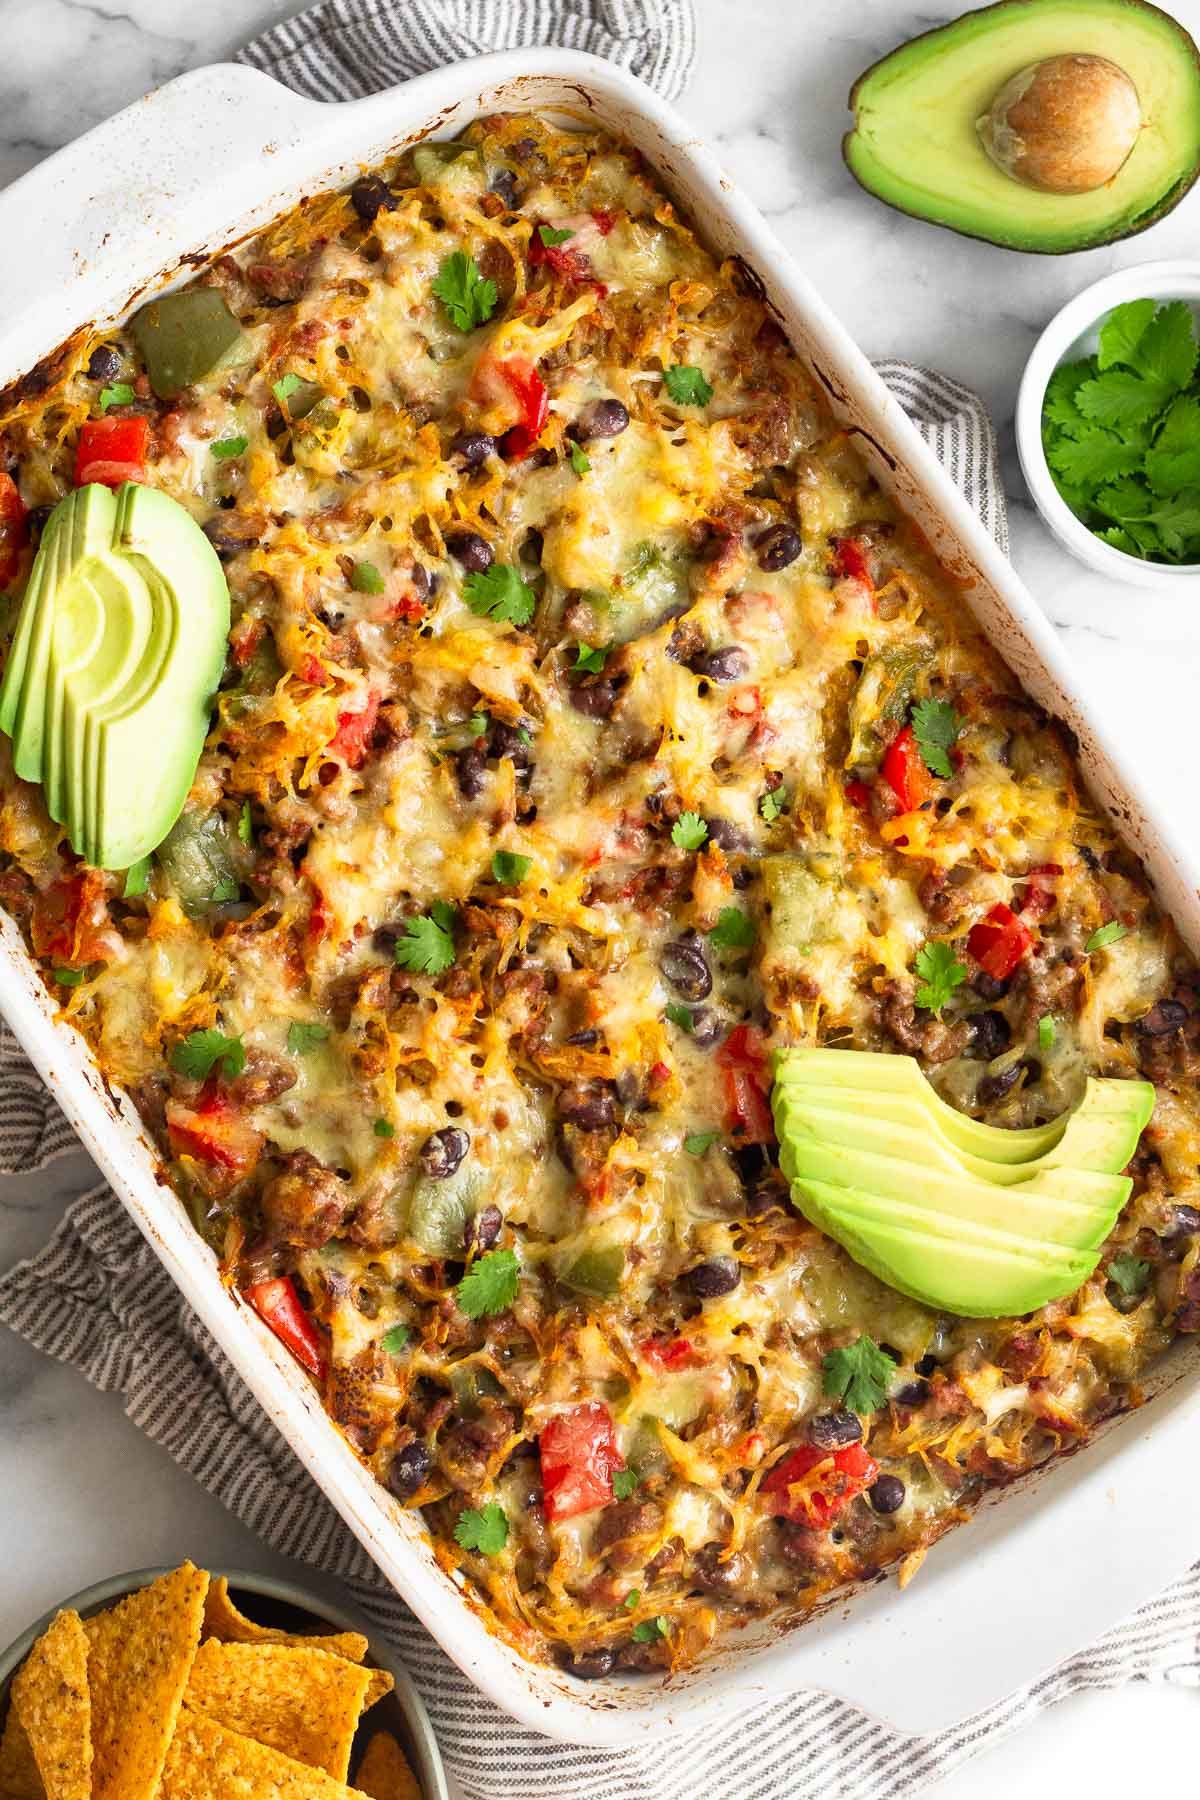 Healthy Chili Spaghetti Squash Casserole in a white casserole dish topped with slices of avocado - one of the recipes for this week's healthy weekly meal plan